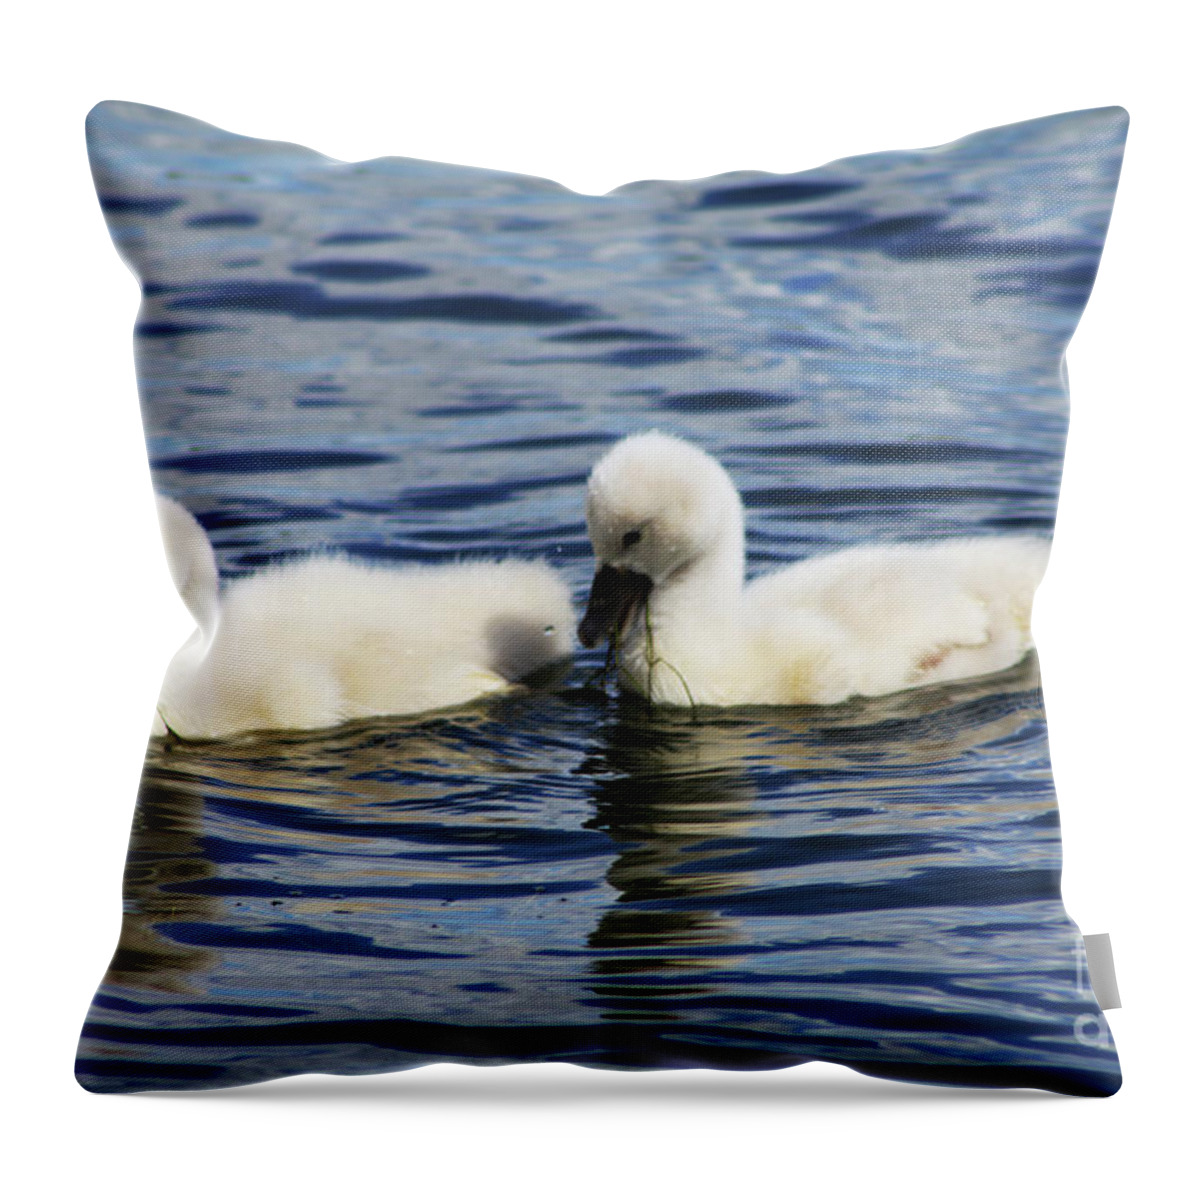 Swans Throw Pillow featuring the photograph Newborn Mute Swans by Alyce Taylor